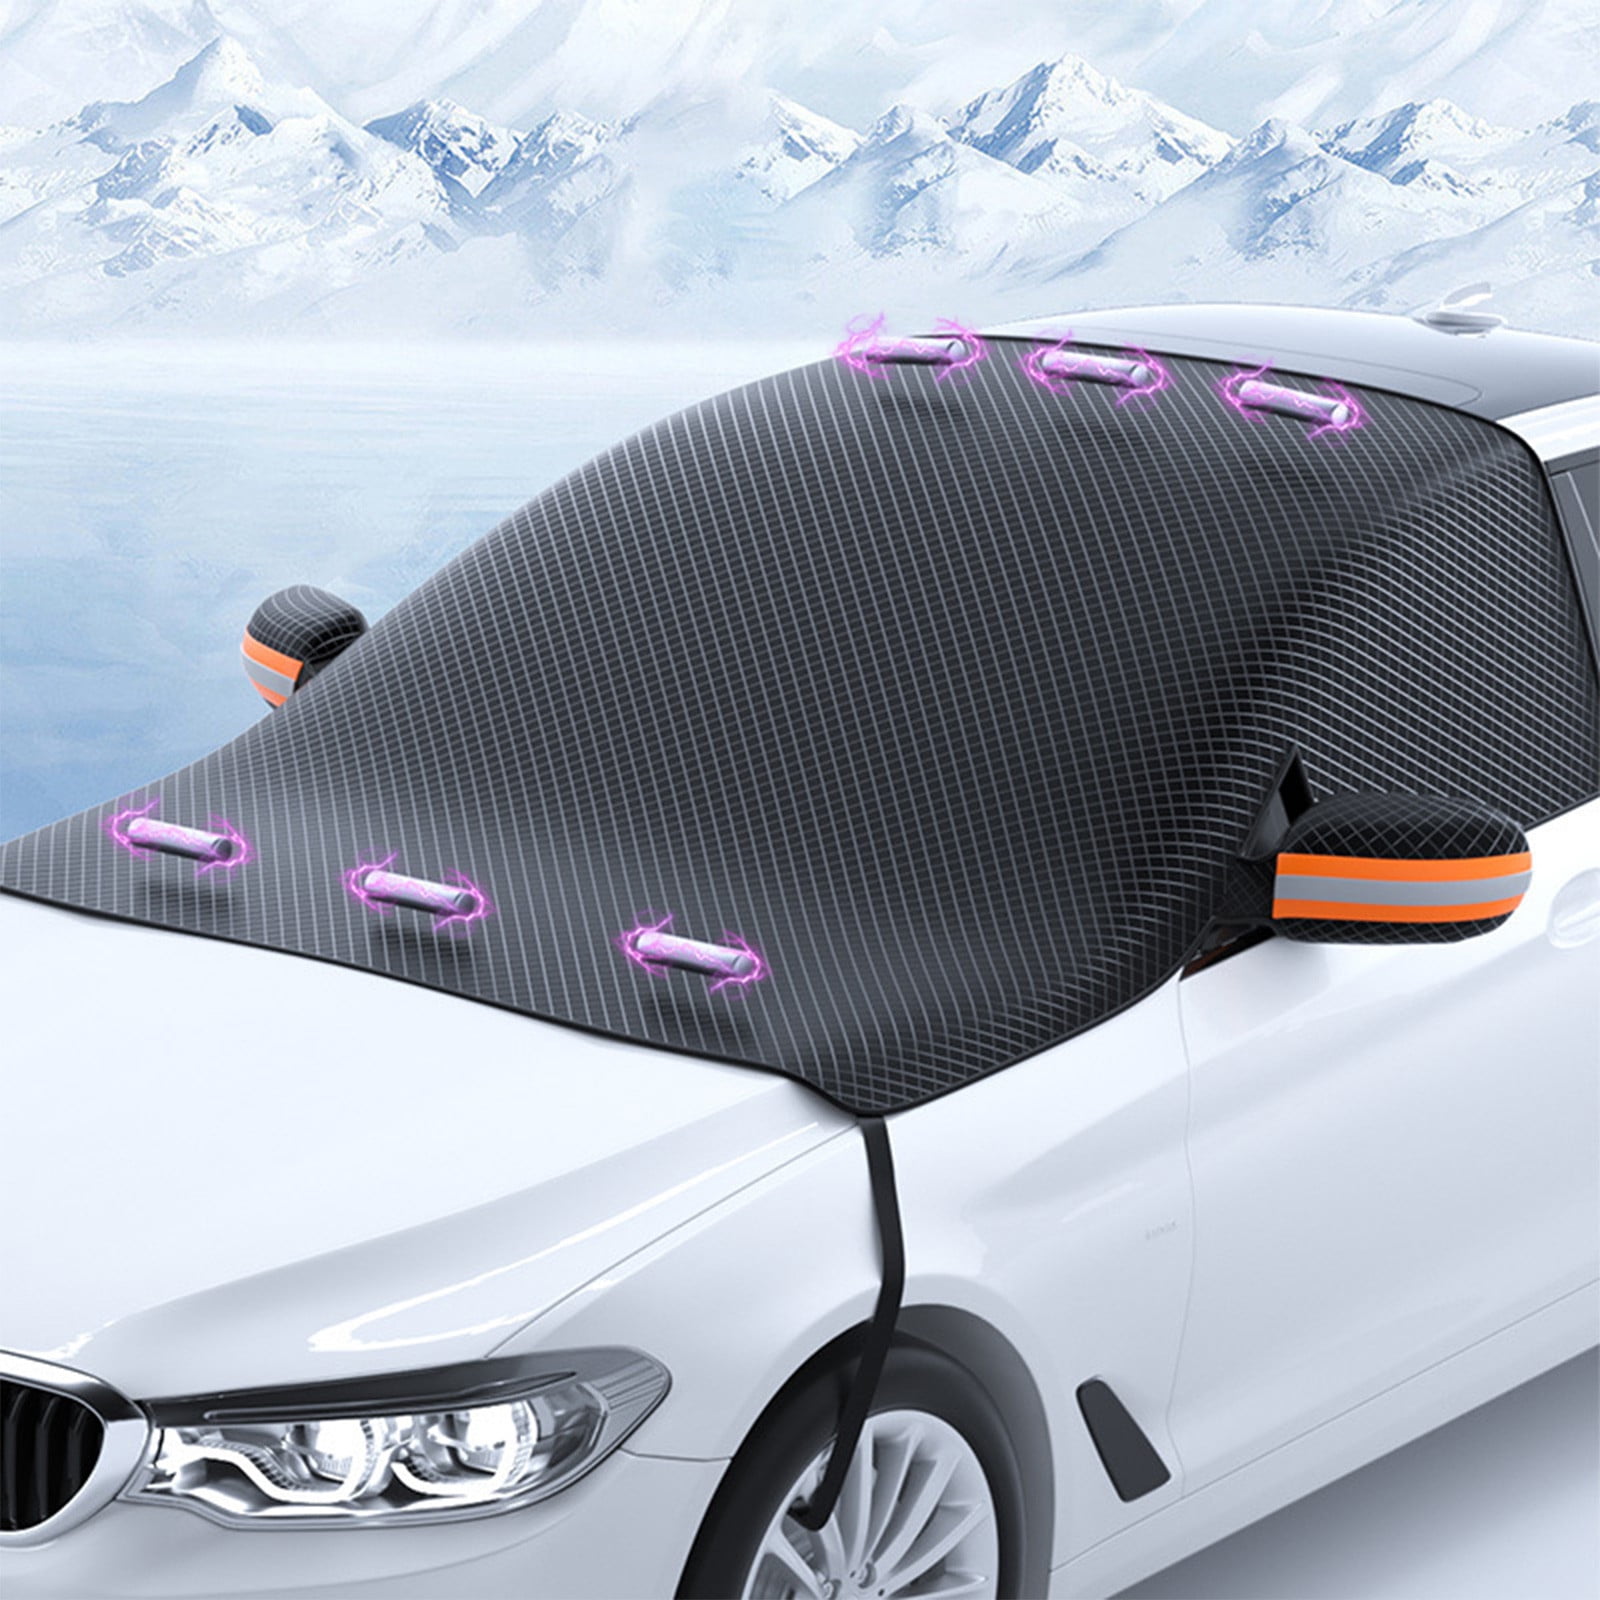 SnowOFF Car Windshield Snow Ice Cover - Sun Shade Protector